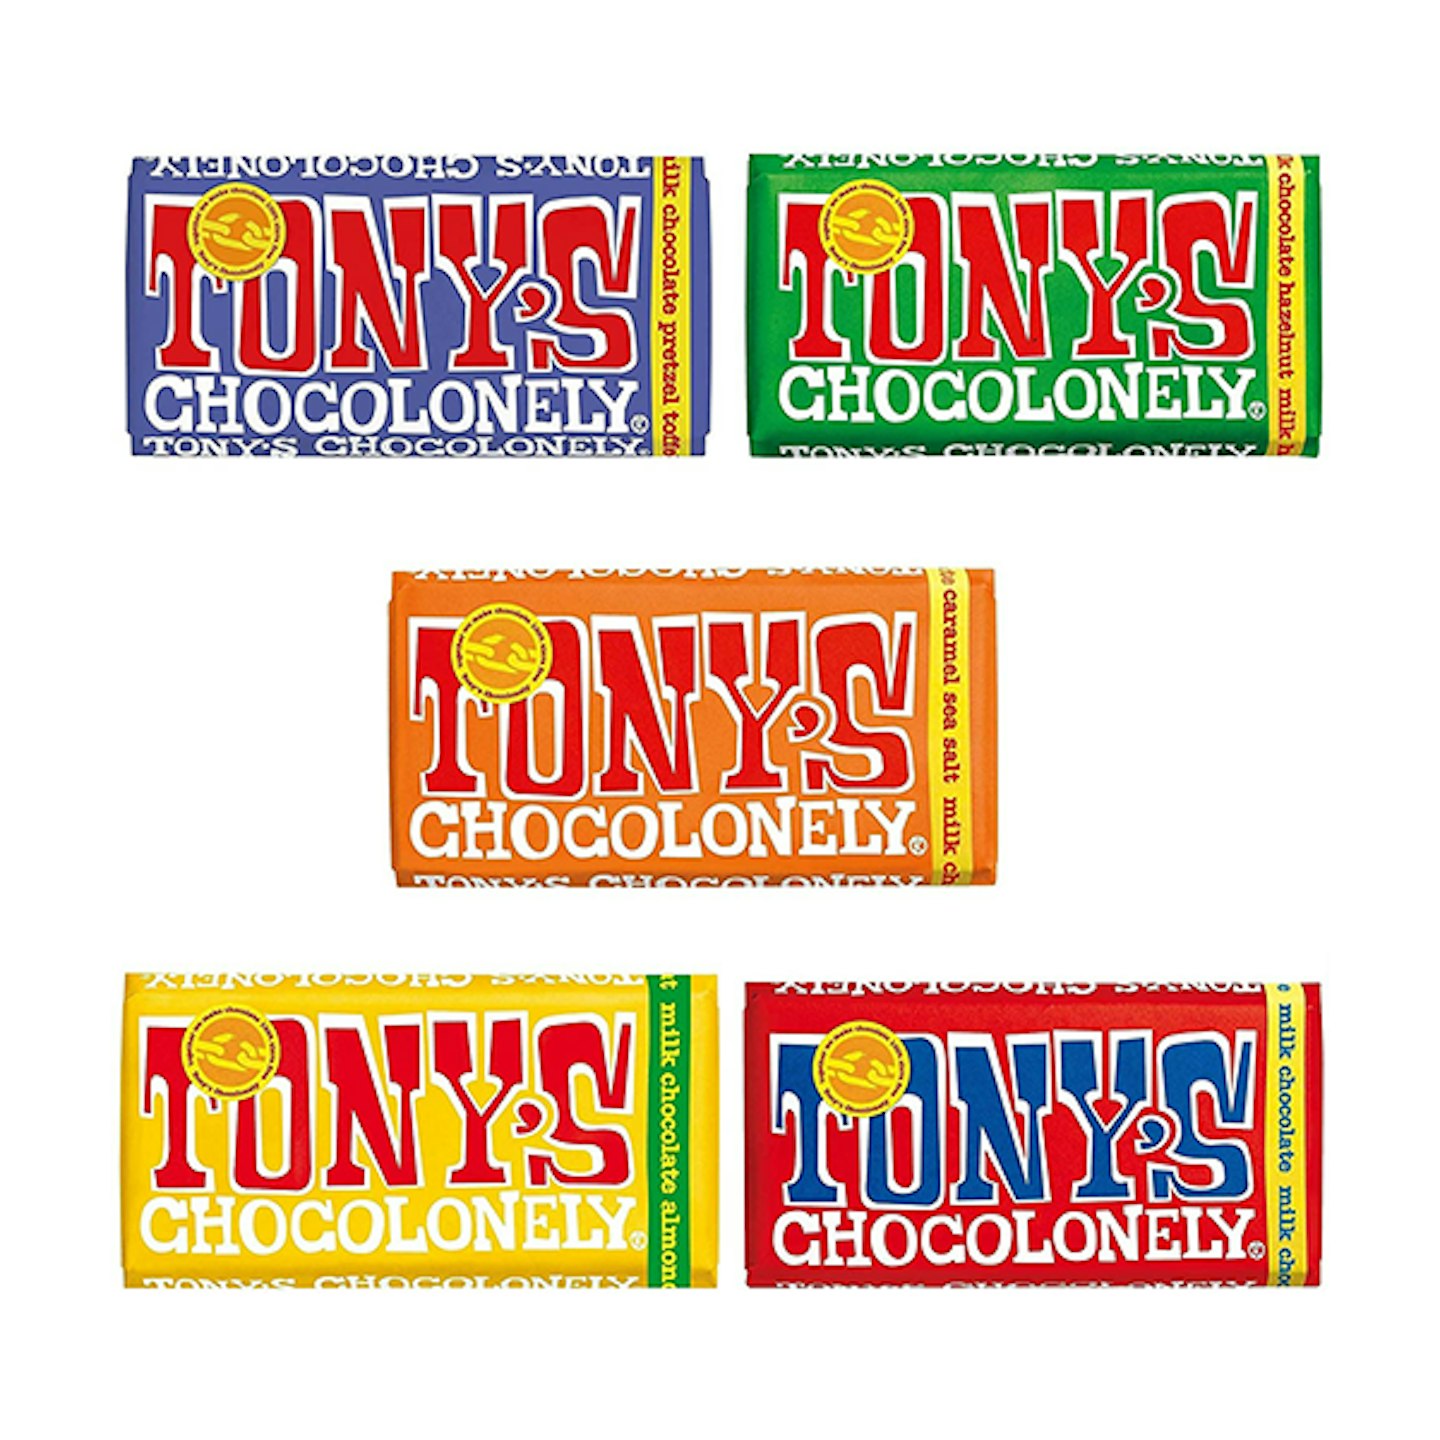 Tony's Chocolonely Chocolate 180g - five Pack, Mix of All five Milk Chocolate Flavours